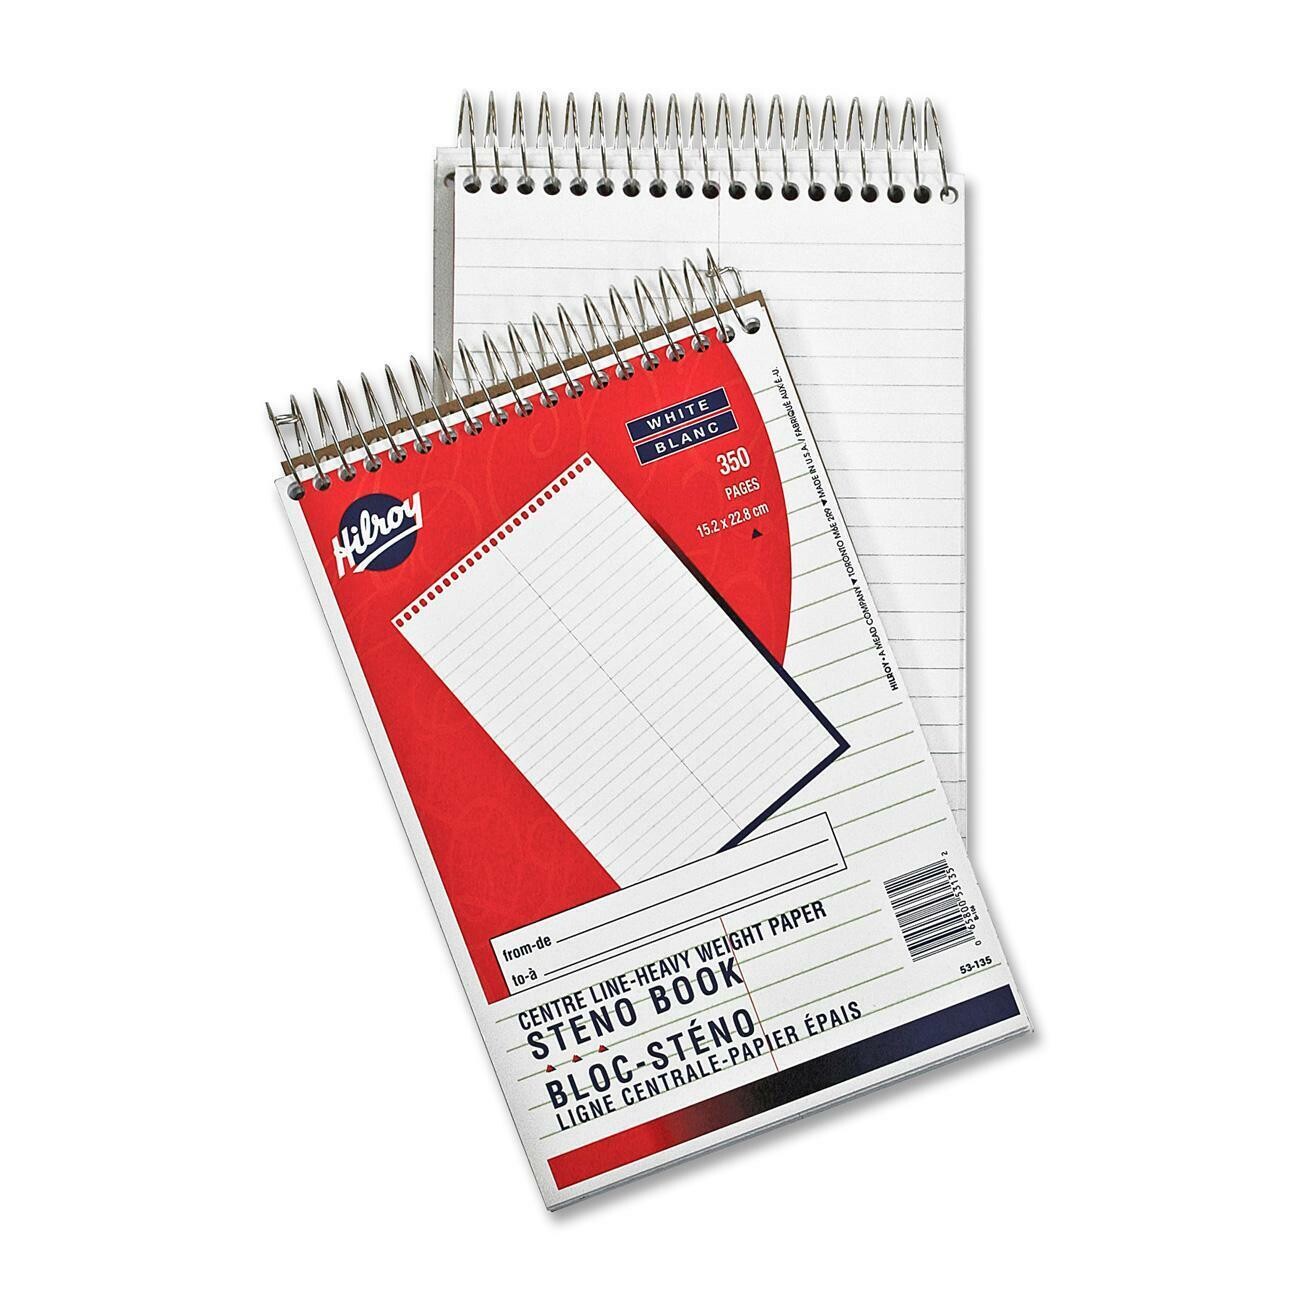 Notebook, Steno Book, Lined, 6" x 9" Red, 350 Pages, Hilroy